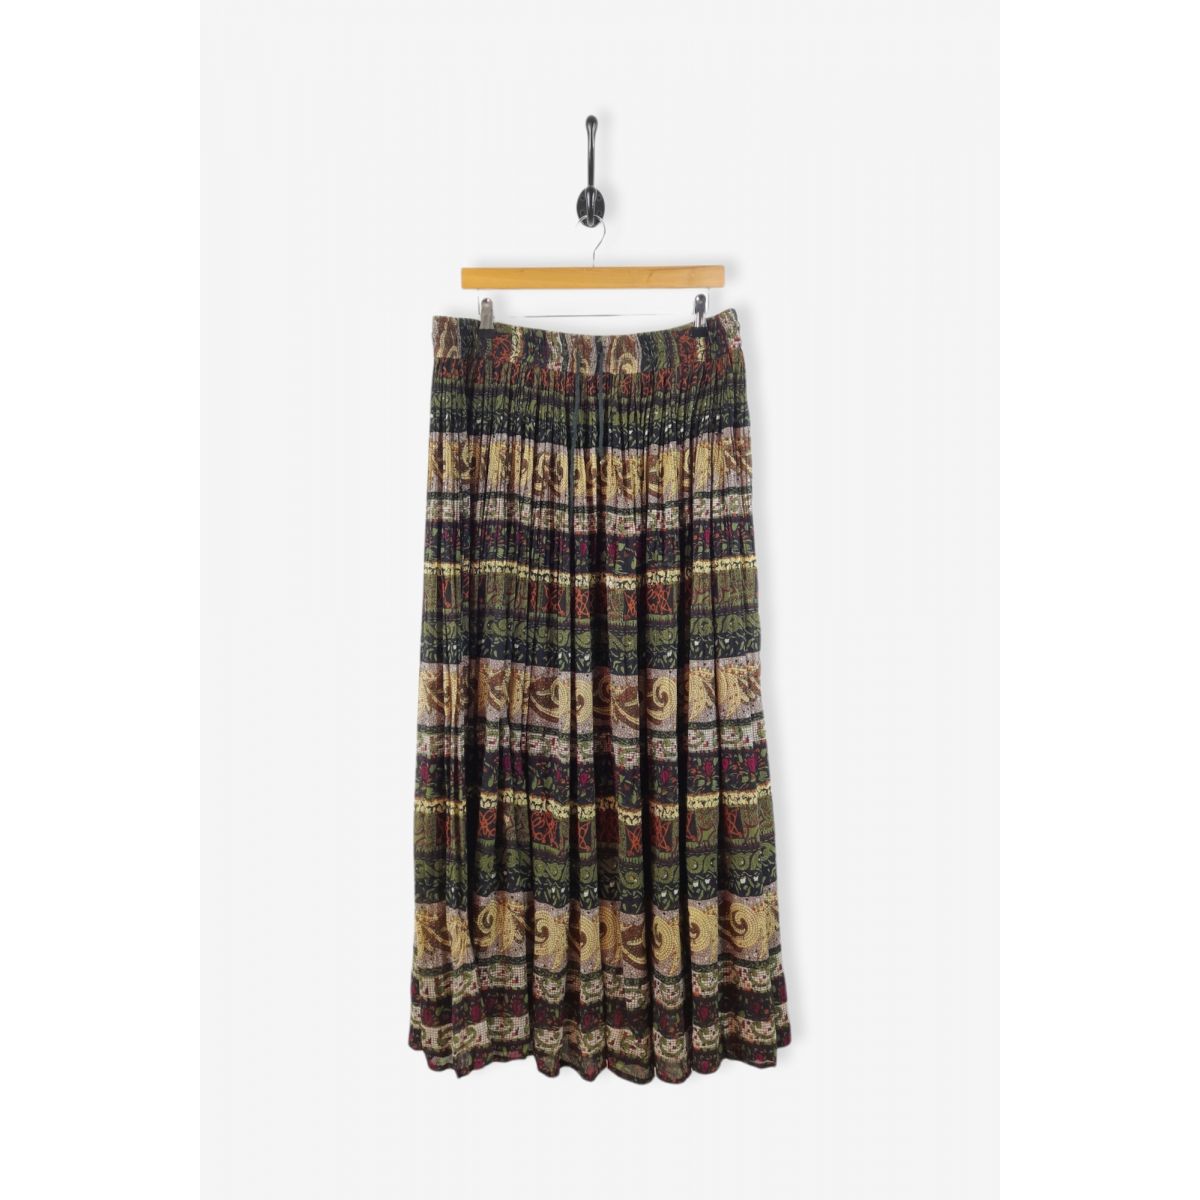 Vintage Boho Hippie-Style Patterned Maxi Skirt Green XL